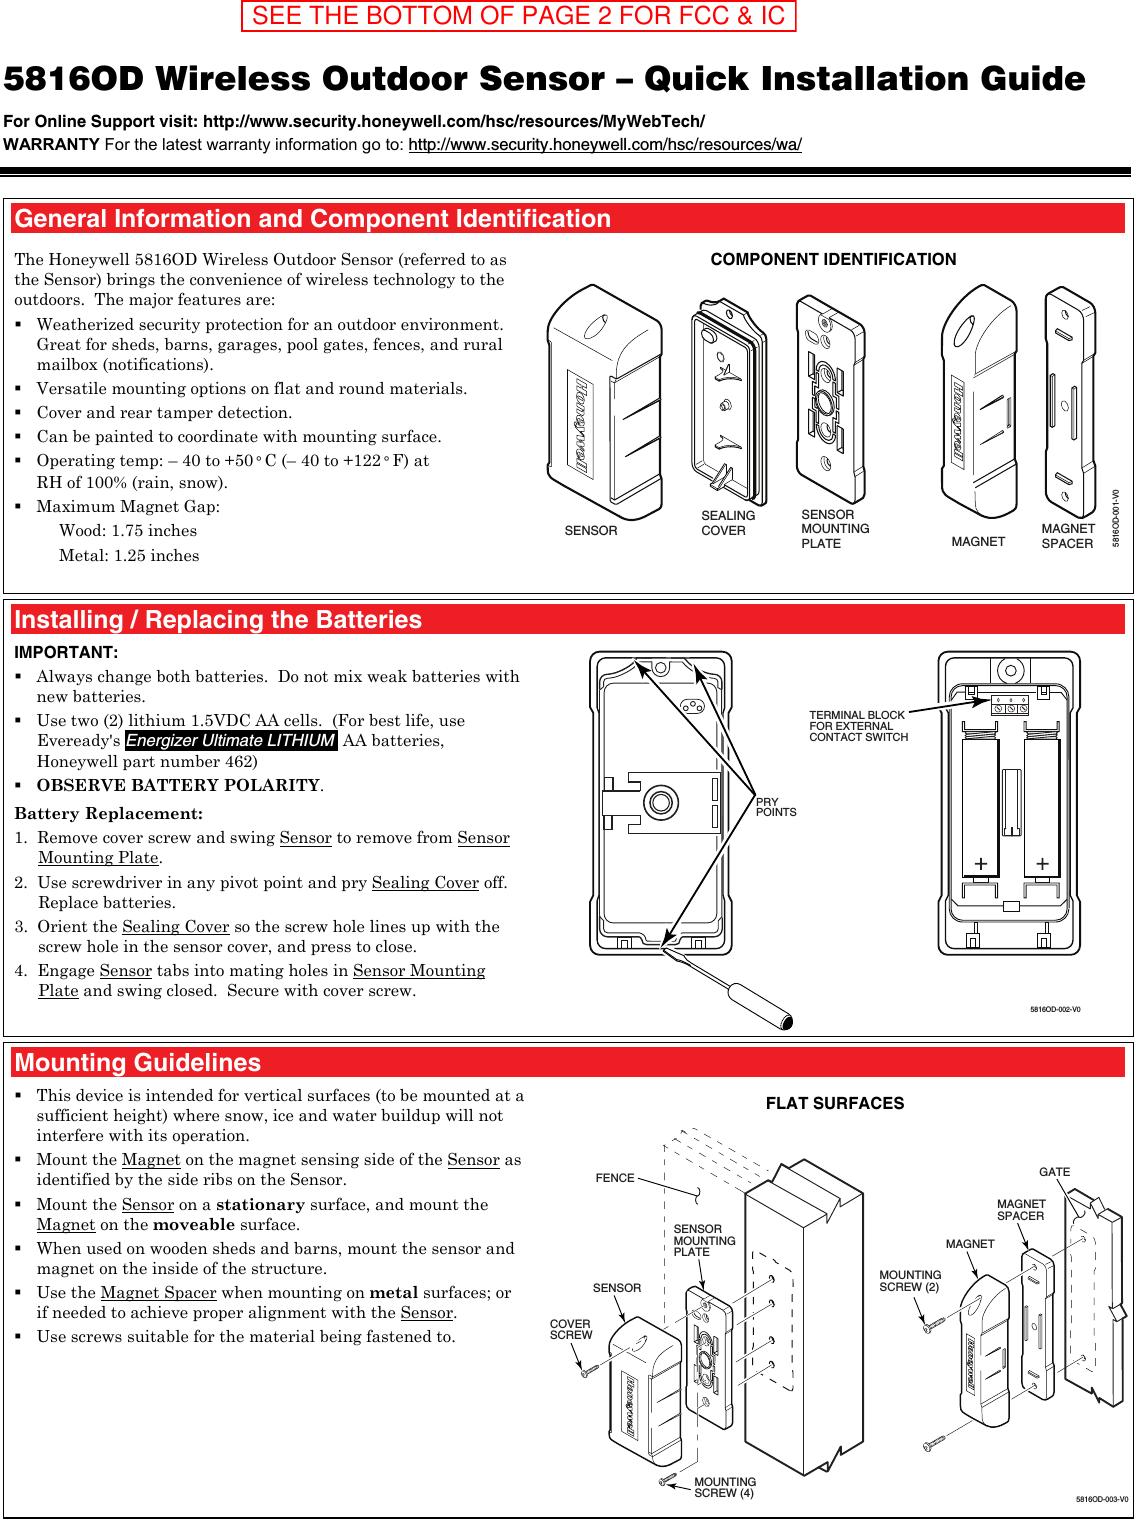  5816OD Wireless Outdoor Sensor – Quick Installation Guide For Online Support visit: http://www.security.honeywell.com/hsc/resources/MyWebTech/  WARRANTY For the latest warranty information go to: http://www.security.honeywell.com/hsc/resources/wa/   General Information and Component Identification The Honeywell 5816OD Wireless Outdoor Sensor (referred to as the Sensor) brings the convenience of wireless technology to the outdoors.  The major features are:   Weatherized security protection for an outdoor environment.  Great for sheds, barns, garages, pool gates, fences, and rural mailbox (notifications).  Versatile mounting options on flat and round materials.  Cover and rear tamper detection.  Can be painted to coordinate with mounting surface.  Operating temp: – 40 to +50° C (– 40 to +122° F) at  RH of 100% (rain, snow).  Maximum Magnet Gap: Wood: 1.75 inches Metal: 1.25 inches   COMPONENT IDENTIFICATION 5816OD-001-V0SENSORMOUNTINGPLATE MAGNETMAGNETSPACERSENSORSEALINGCOVER   Installing / Replacing the Batteries IMPORTANT:  Always change both batteries.  Do not mix weak batteries with new batteries.  Use two (2) lithium 1.5VDC AA cells.  (For best life, use Eveready&apos;s Energizer Ultimate LITHIUM  AA batteries, Honeywell part number 462)  OBSERVE BATTERY POLARITY. Battery Replacement: 1.  Remove cover screw and swing Sensor to remove from Sensor Mounting Plate. 2.  Use screwdriver in any pivot point and pry Sealing Cover off.  Replace batteries. 3.  Orient the Sealing Cover so the screw hole lines up with the screw hole in the sensor cover, and press to close. 4.  Engage Sensor tabs into mating holes in Sensor Mounting Plate and swing closed.  Secure with cover screw.  5816OD-002-V0PRYPOINTSTERMINAL BLOCKFOR EXTERNALCONTACT SWITCH  Mounting Guidelines  This device is intended for vertical surfaces (to be mounted at a sufficient height) where snow, ice and water buildup will not interfere with its operation.  Mount the Magnet on the magnet sensing side of the Sensor as identified by the side ribs on the Sensor.  Mount the Sensor on a stationary surface, and mount the Magnet on the moveable surface.   When used on wooden sheds and barns, mount the sensor and magnet on the inside of the structure.  Use the Magnet Spacer when mounting on metal surfaces; or if needed to achieve proper alignment with the Sensor.  Use screws suitable for the material being fastened to.  FLAT SURFACES COVERSCREW MOUNTINGSCREW (4) 5816OD-003-V0MAGNET MAGNETSPACERMOUNTINGSCREW (2) SENSOR SENSORMOUNTINGPLATEFENCE GATE SEE THE BOTTOM OF PAGE 2 FOR FCC &amp; IC STATEMENTS